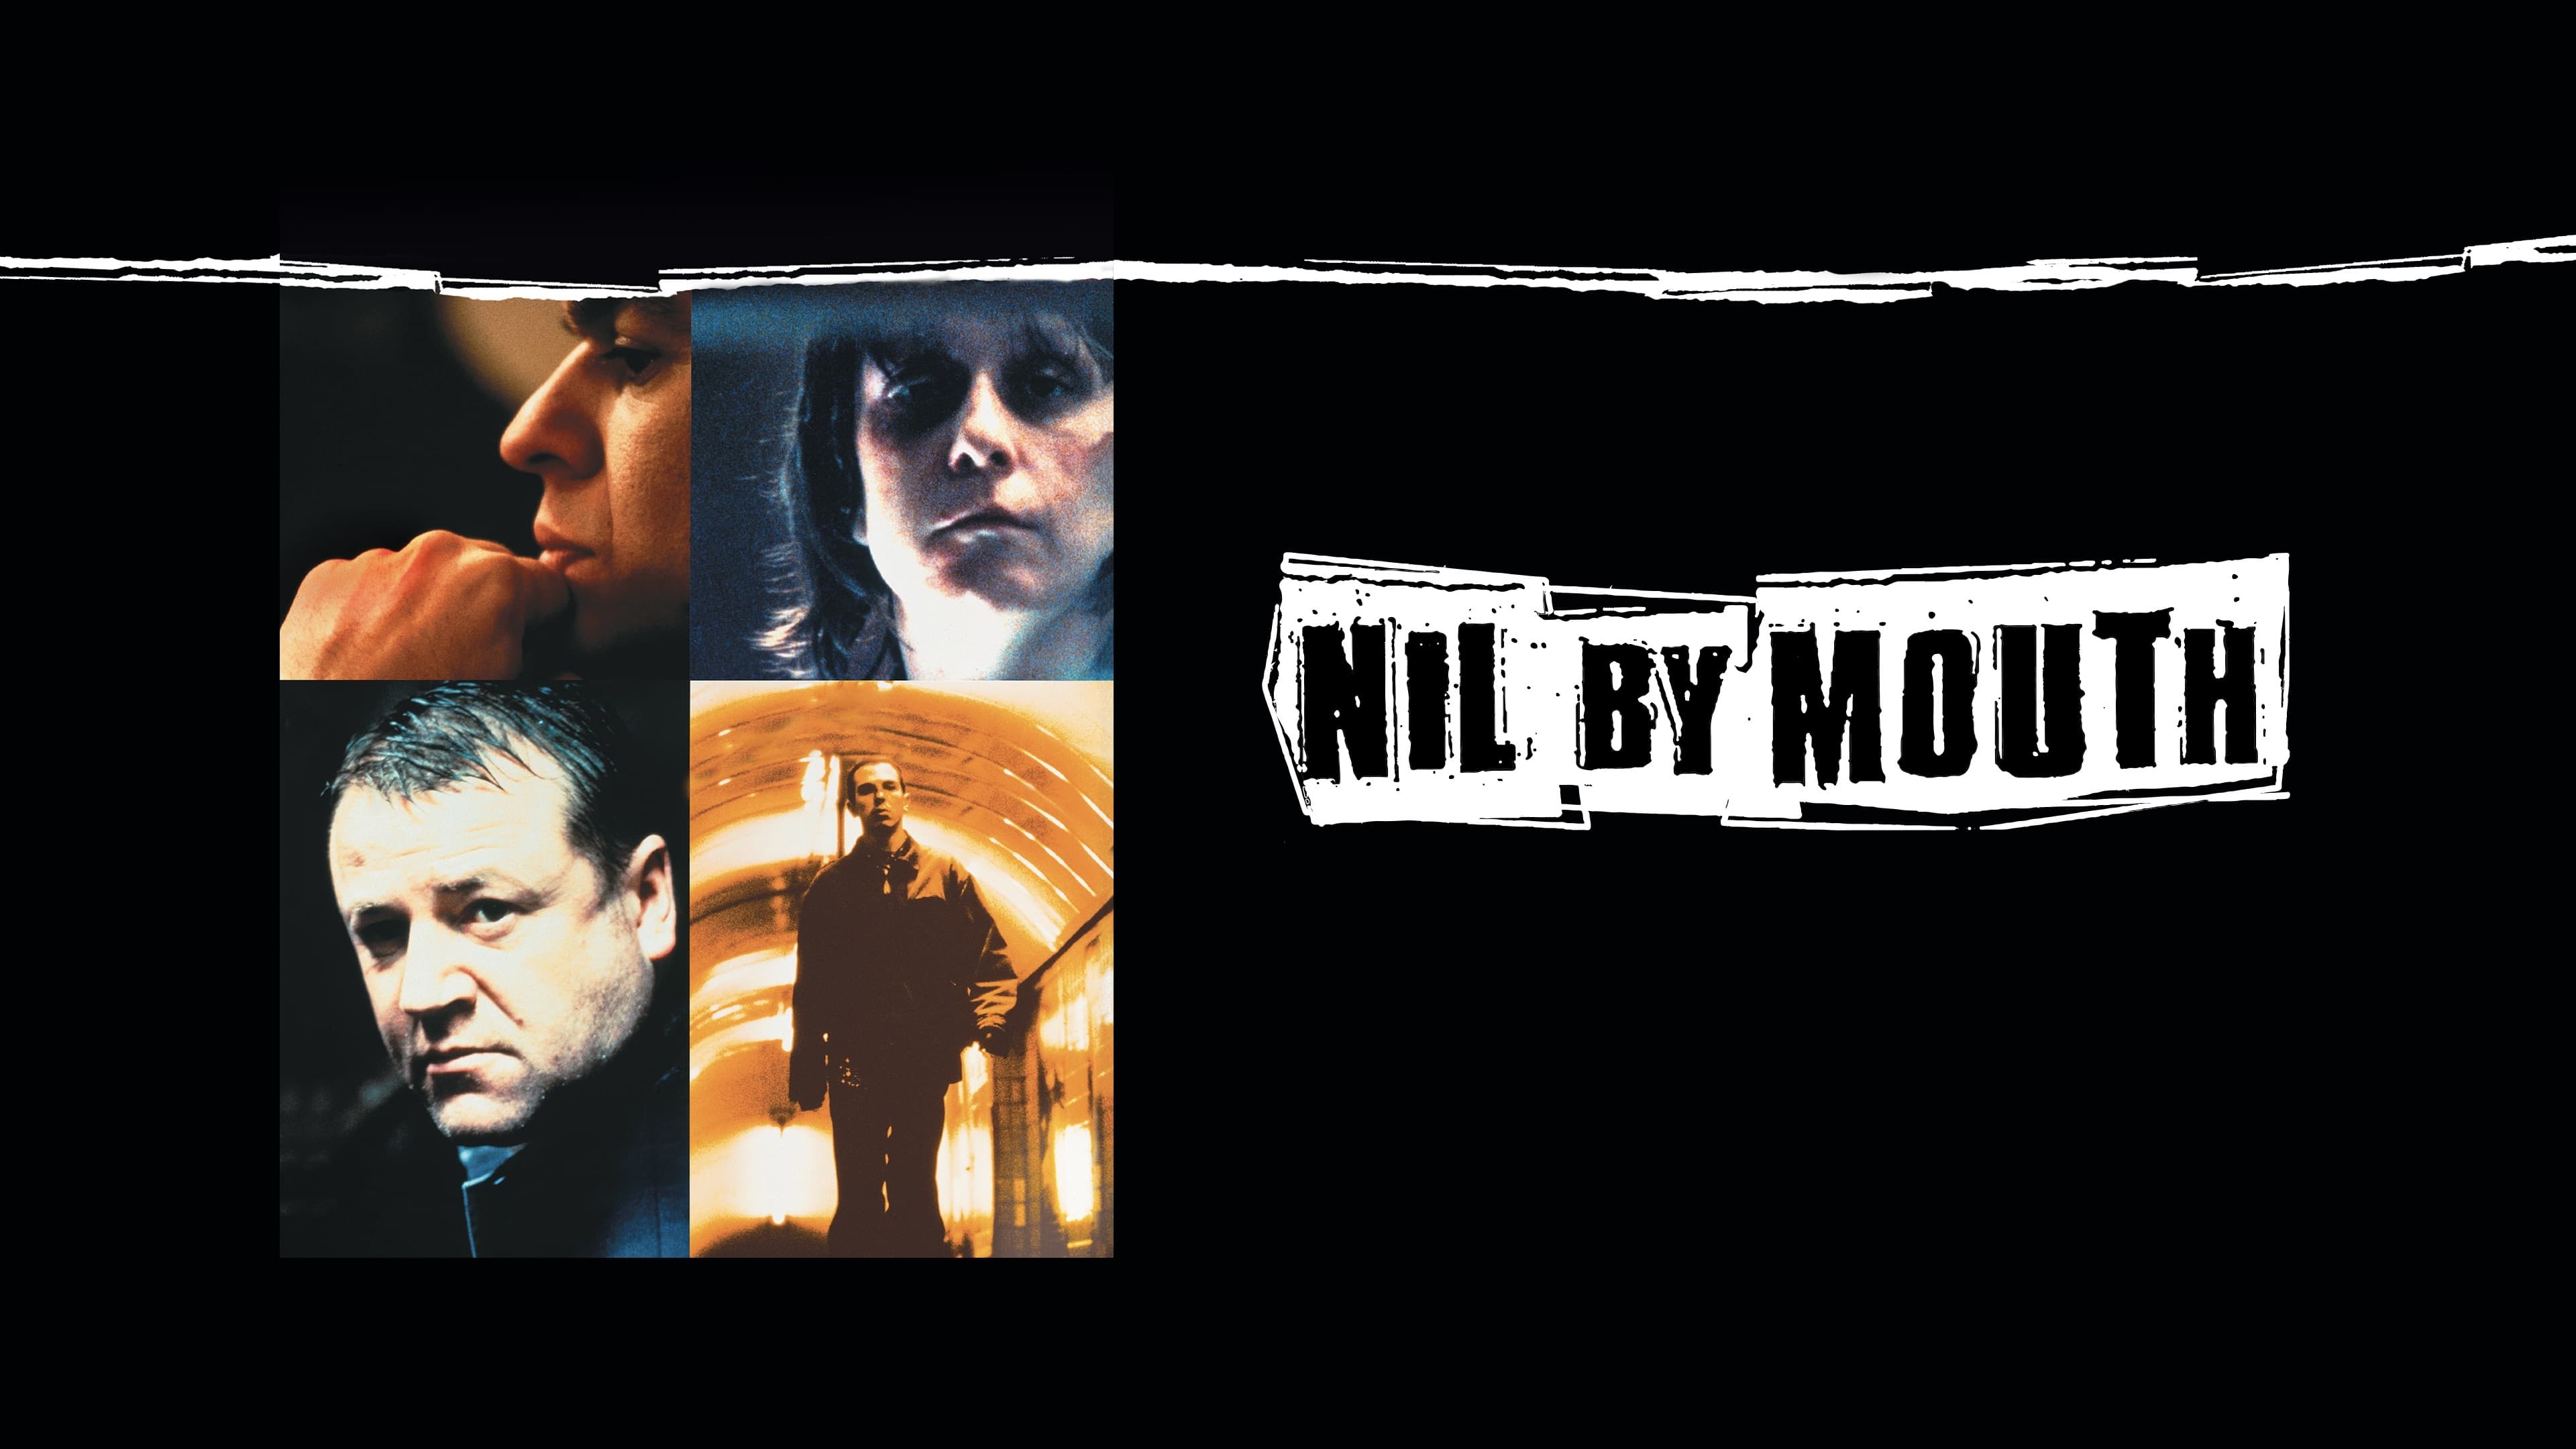 Nil by Mouth